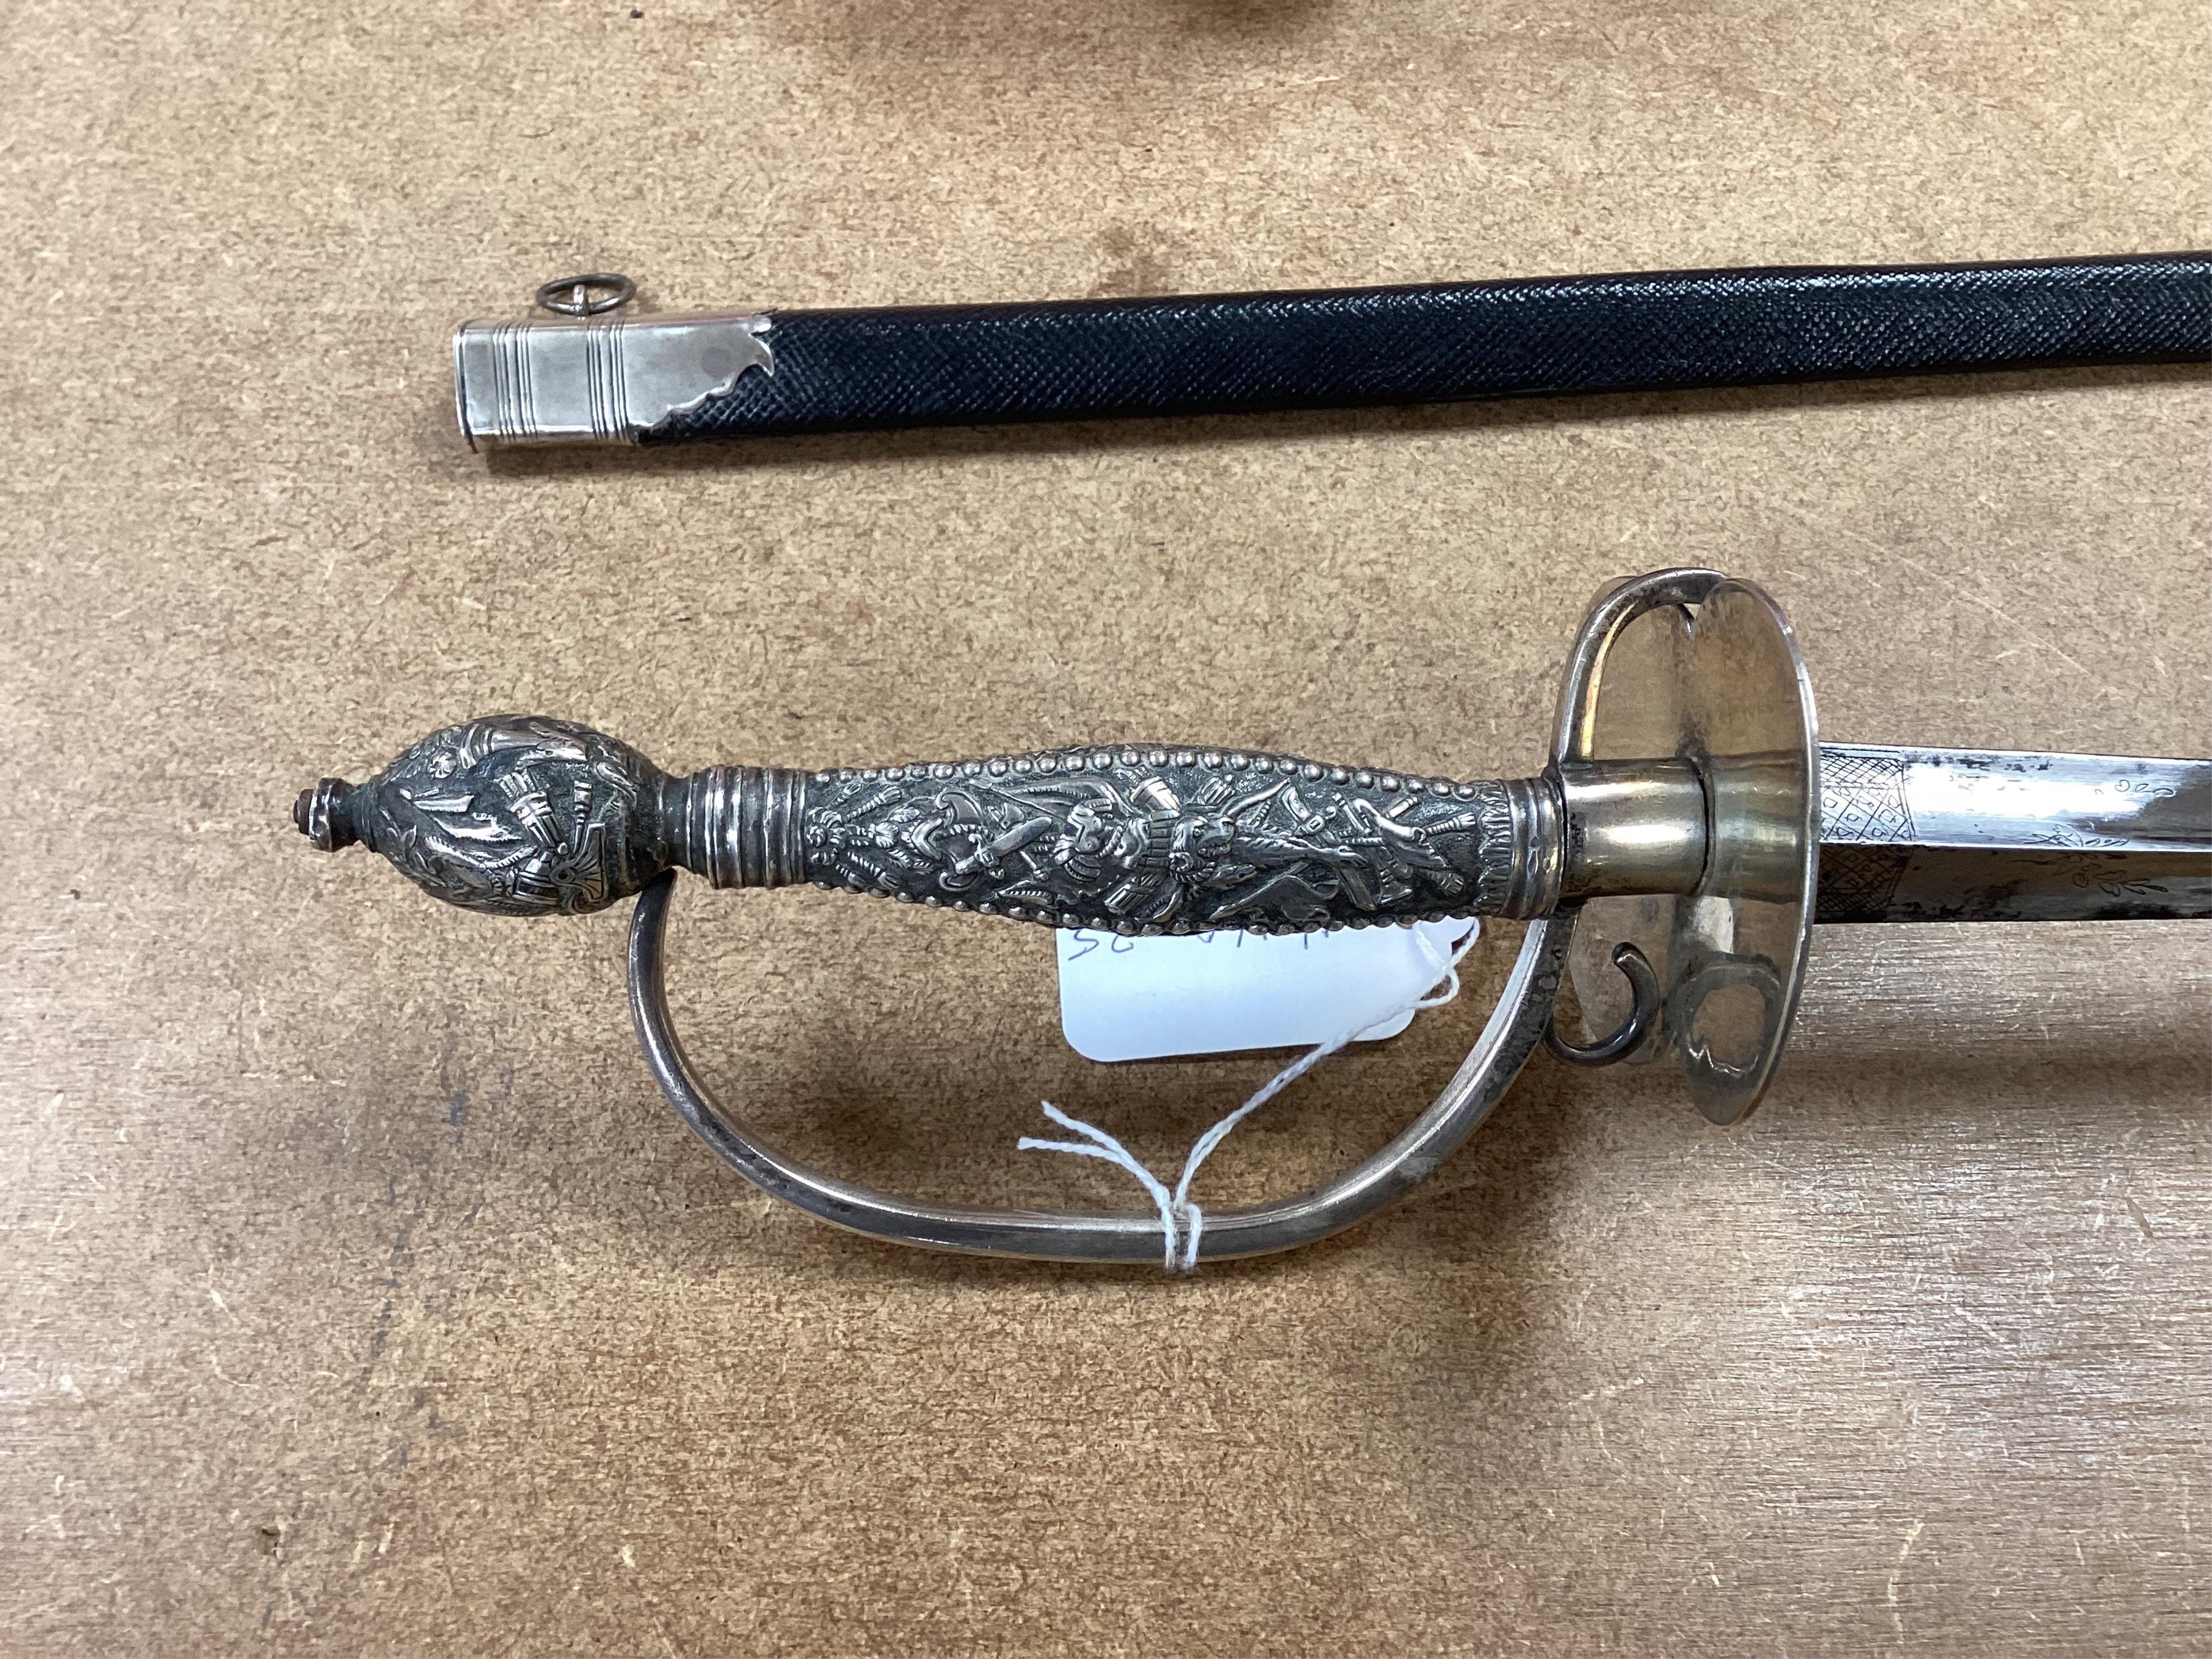 A late 18th century court sword with white metal grip, knuckle guard and mounts, decoration to scabbard band believe to be based on Admiral Duncan’s crest (Camperdown 1797), blade 84cm. Condition - fair to good, some wea